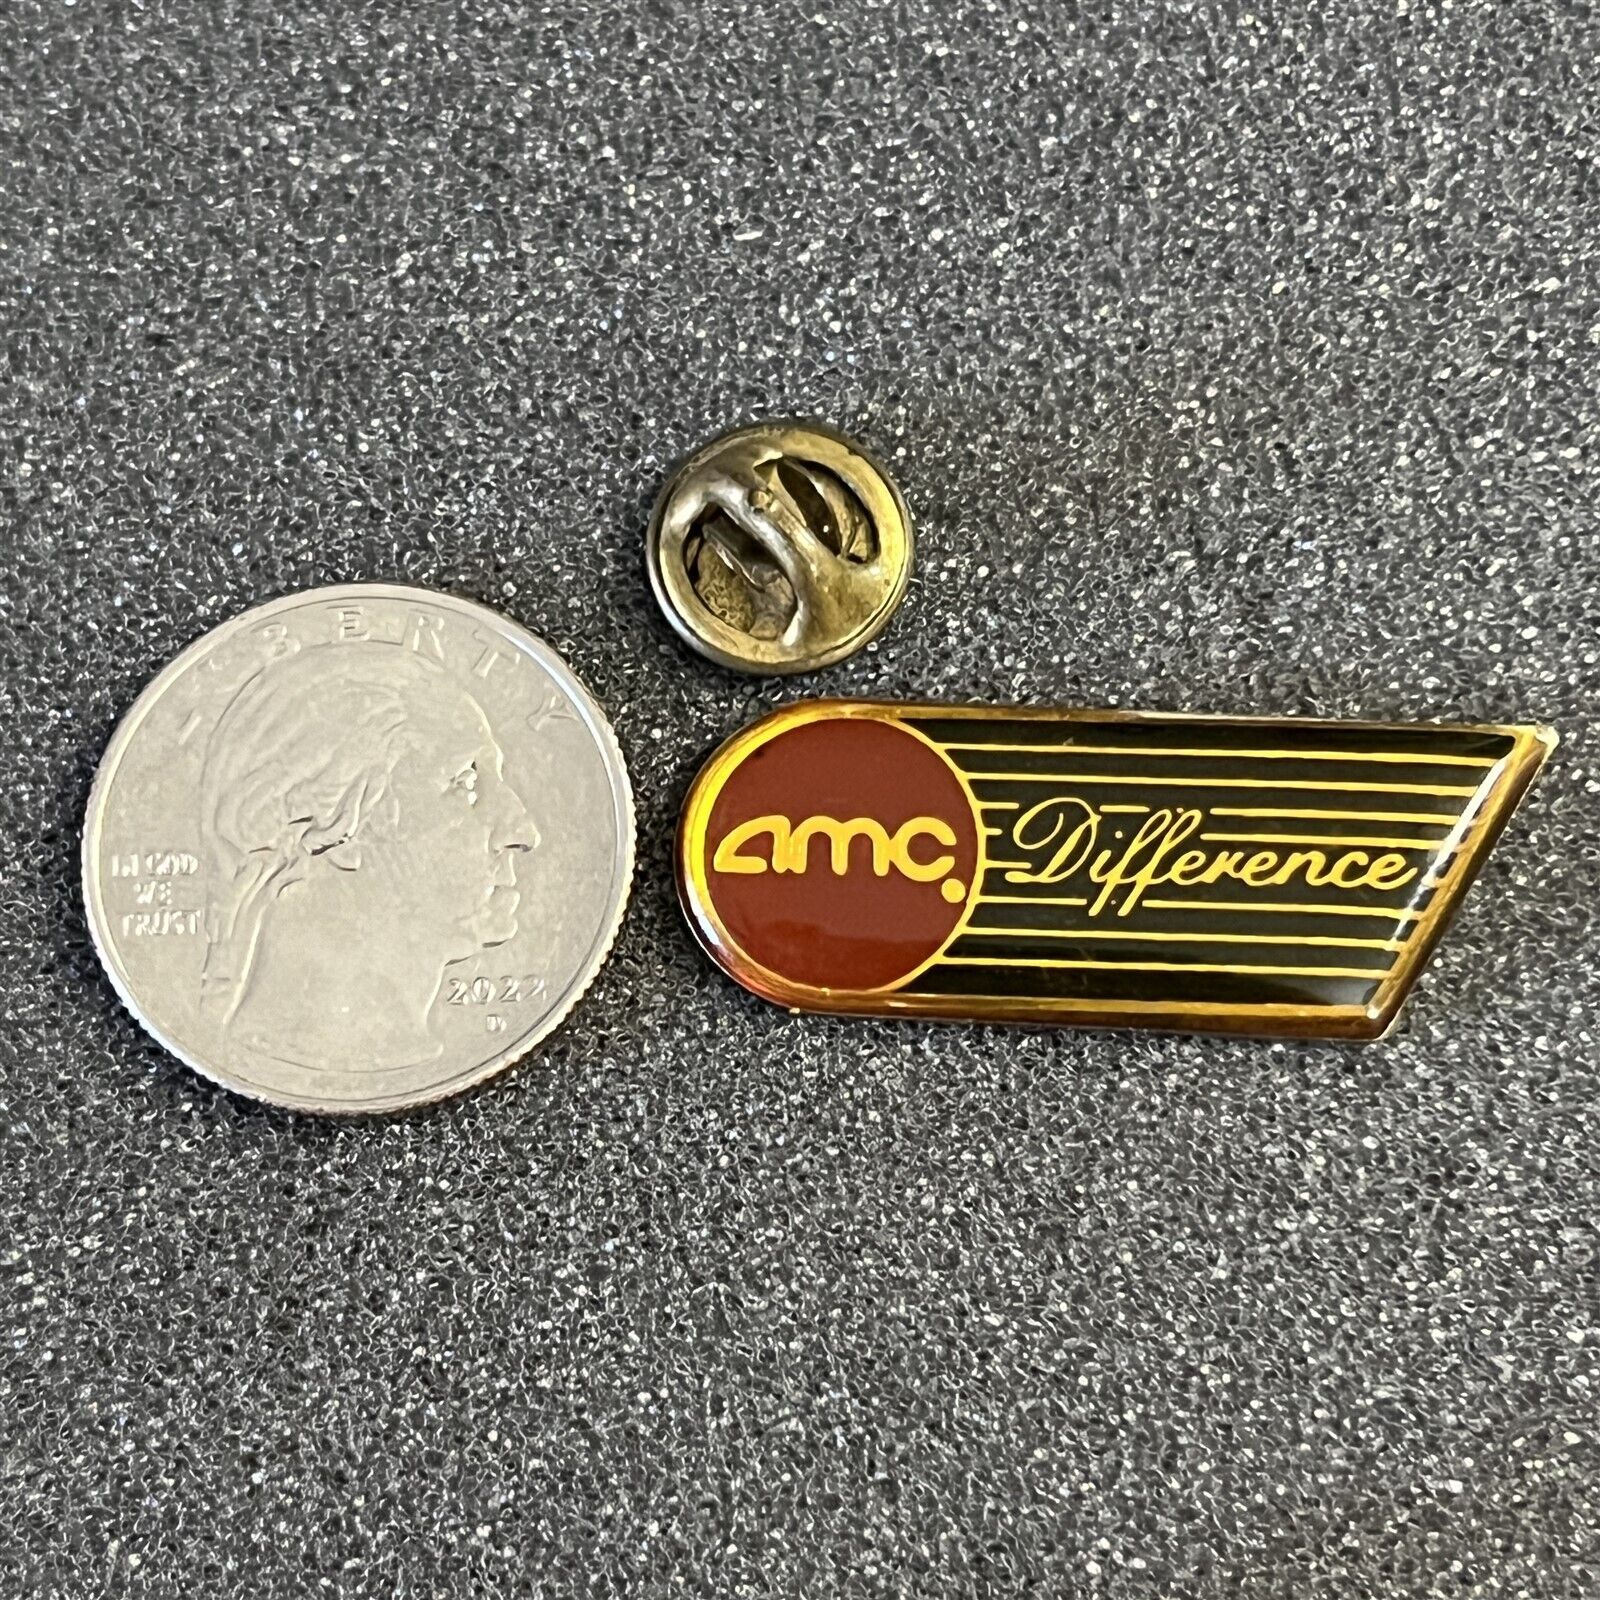 AMC Movie Theaters Difference Employee Pin Pinback #45442